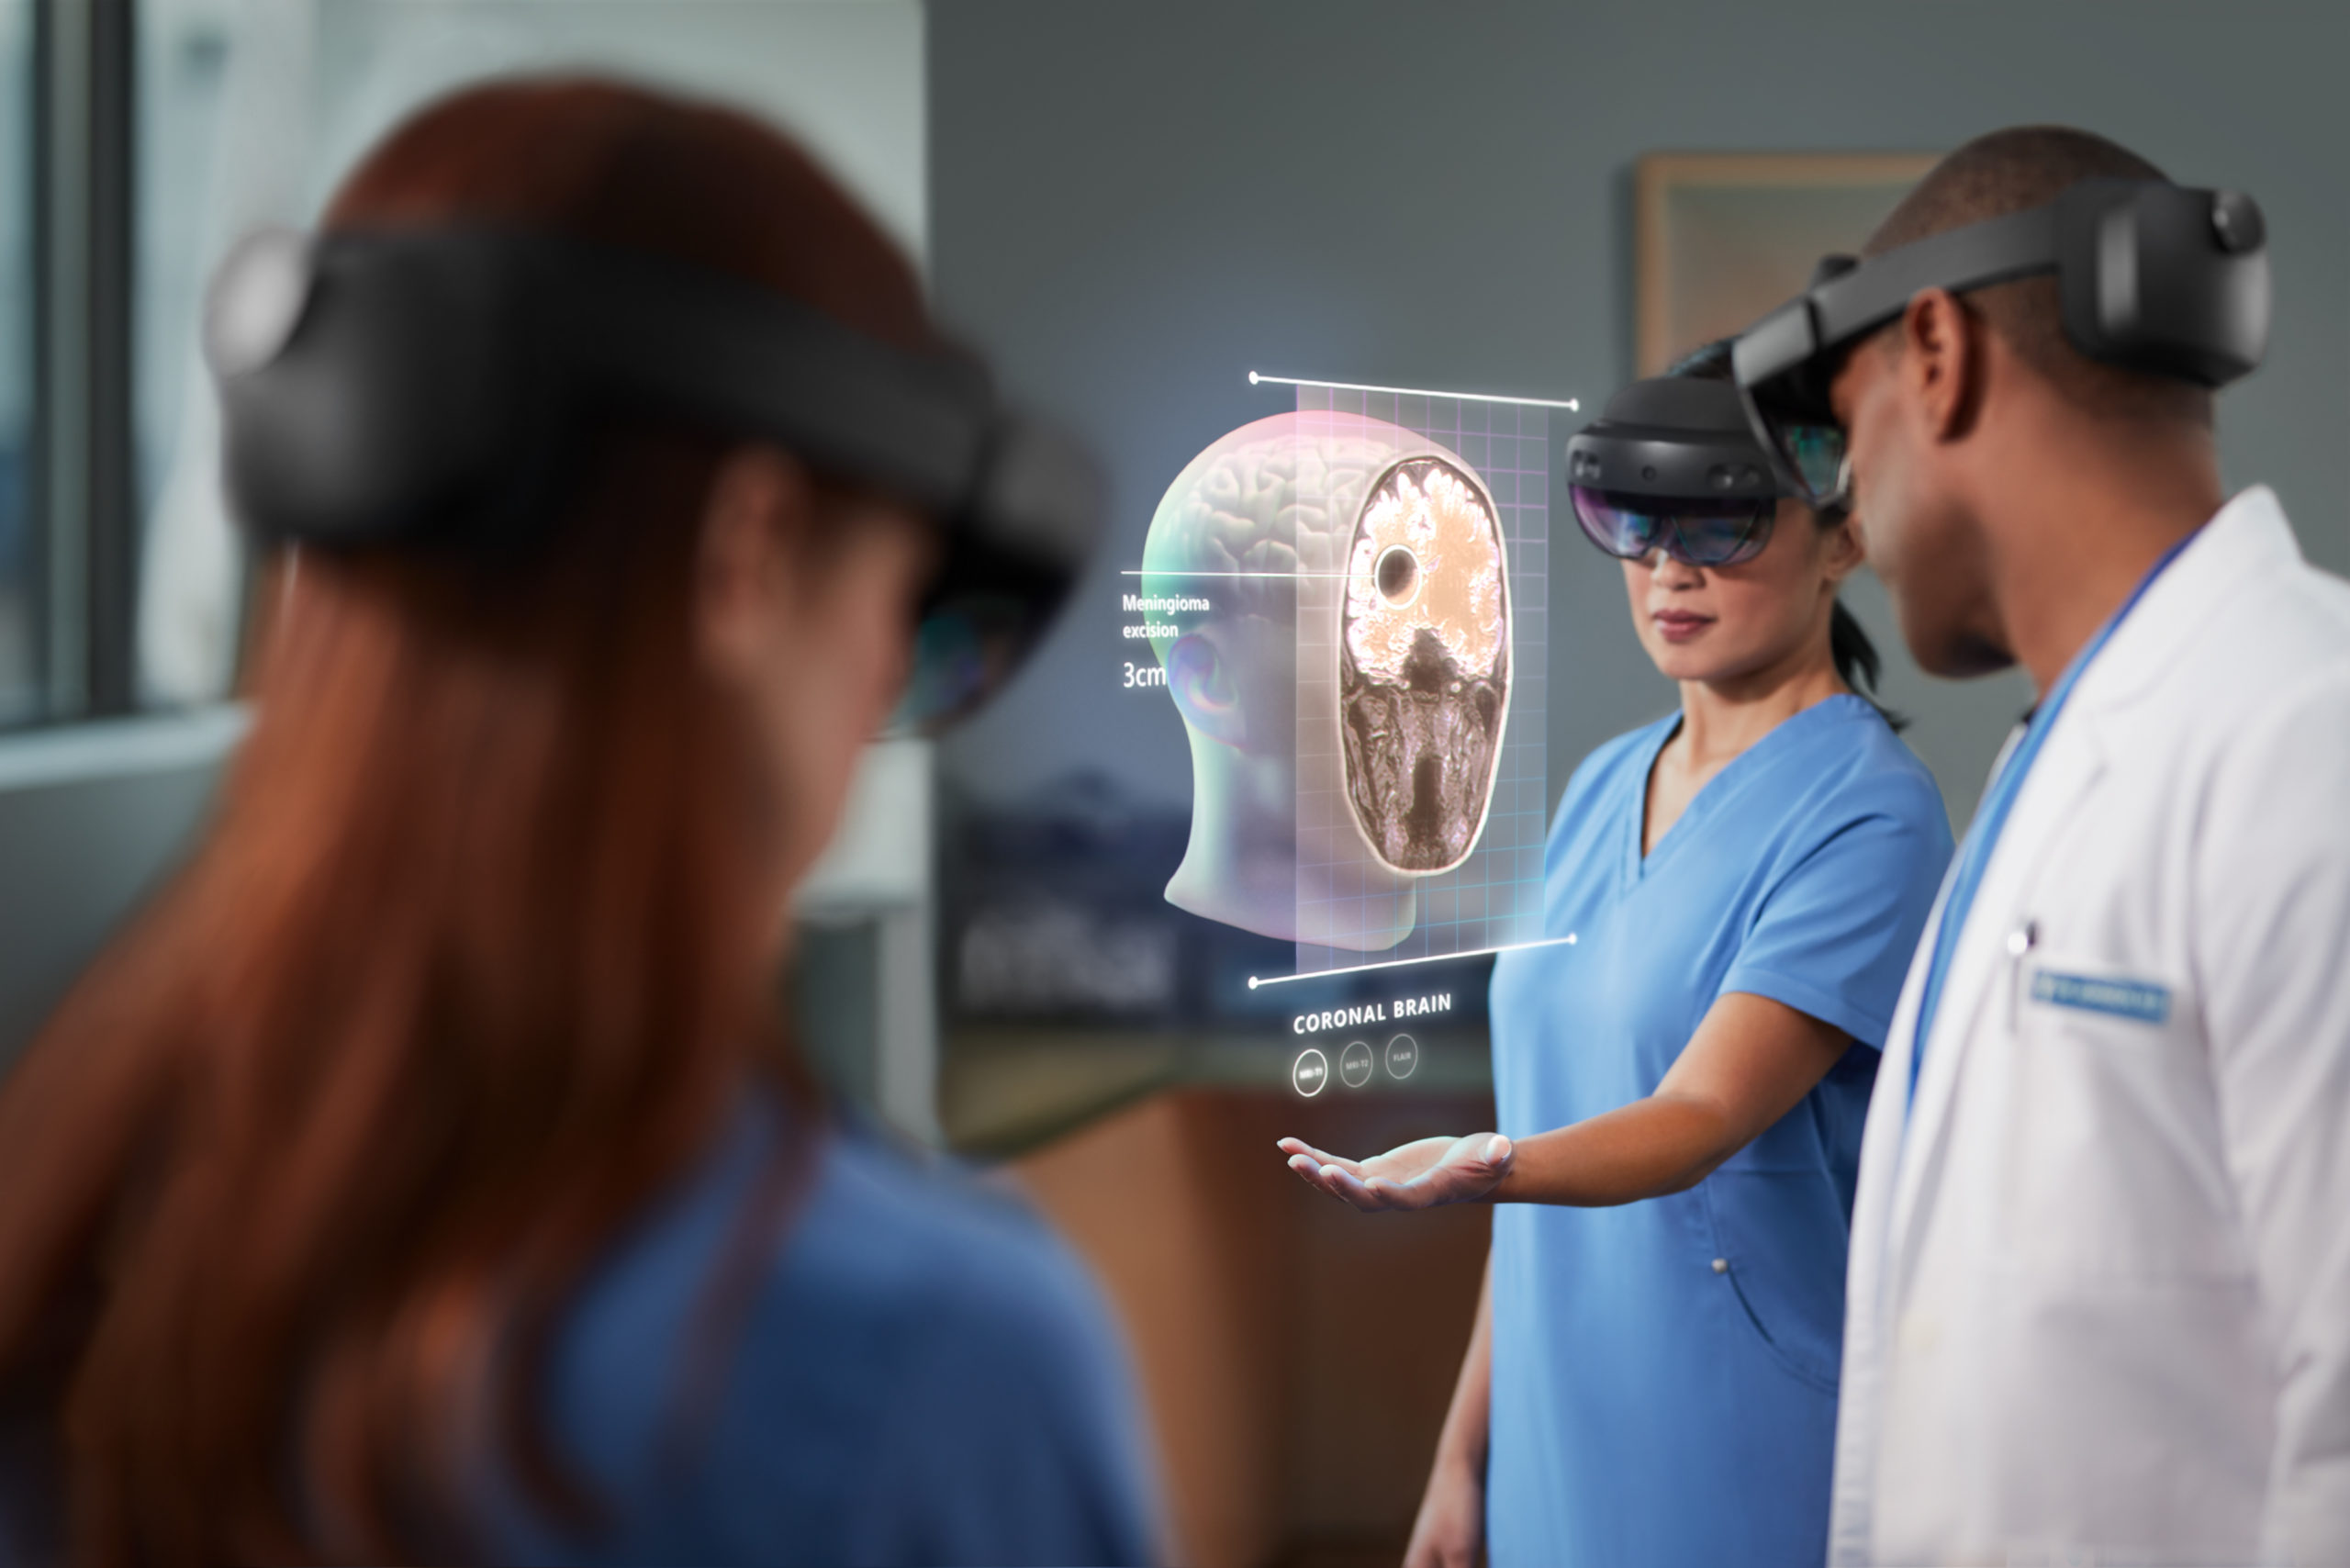 What Skills Are Needed To Use Microsoft HoloLens